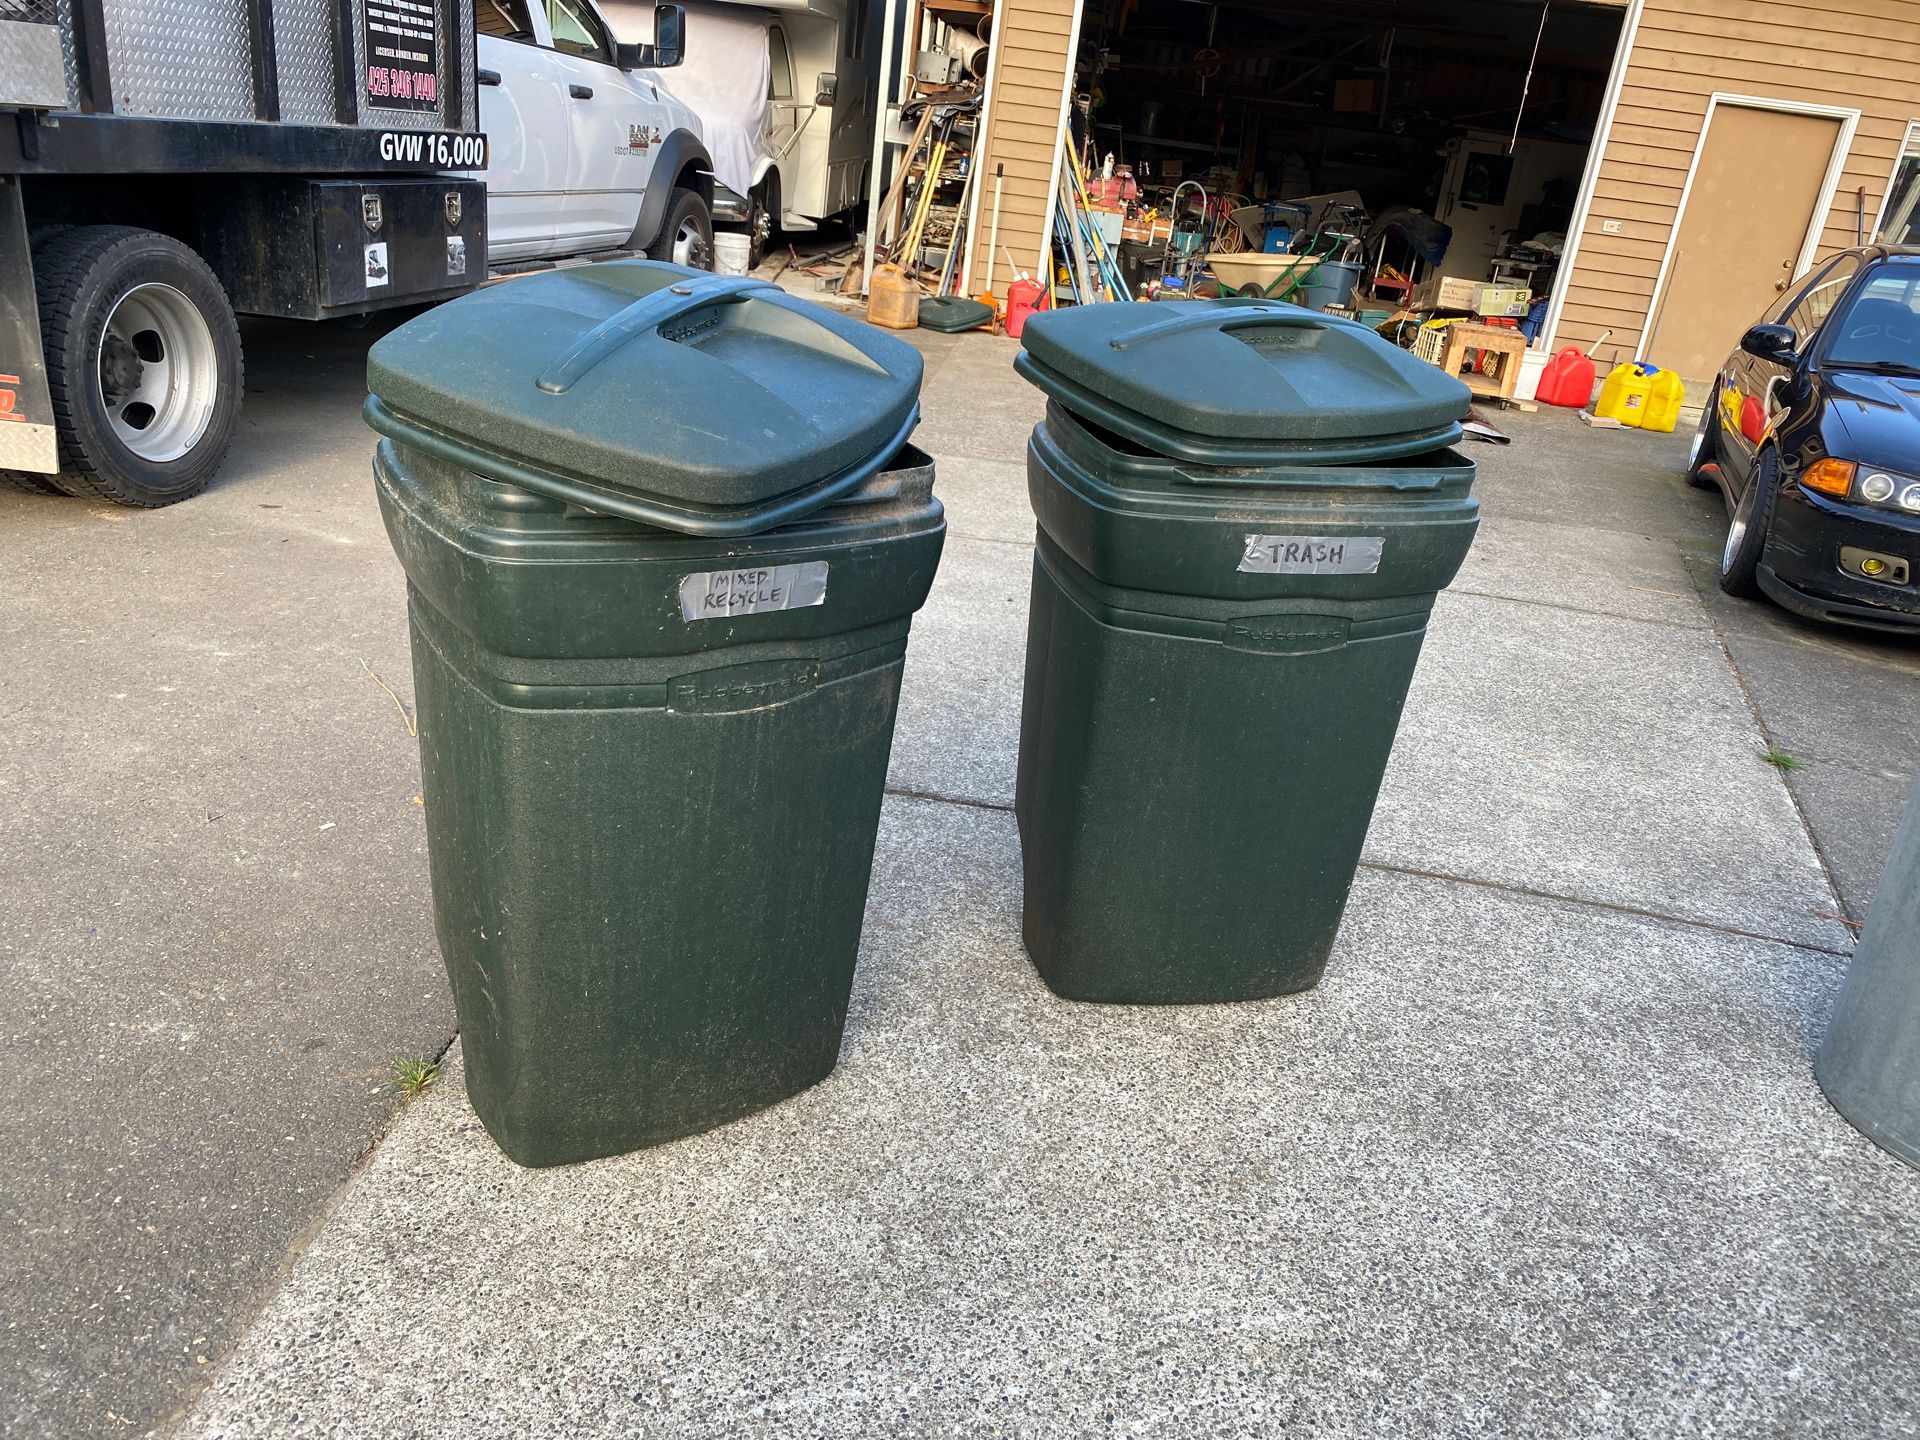 2 RUBBERMAID Garbage cans.15 $ firm each